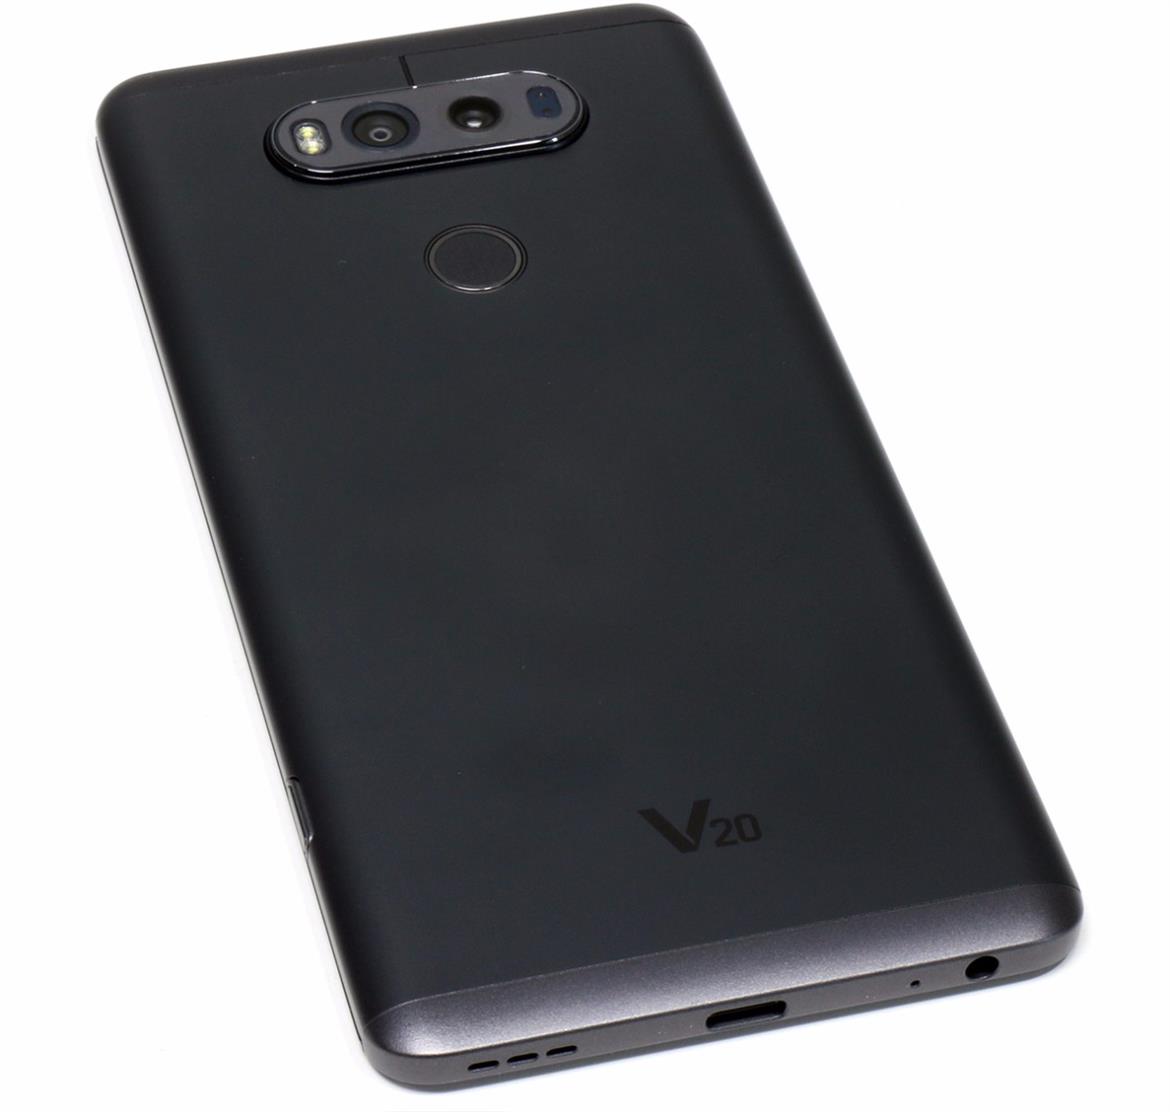 LG V20 Review: Android Nougat-Infused And Feature-Rich